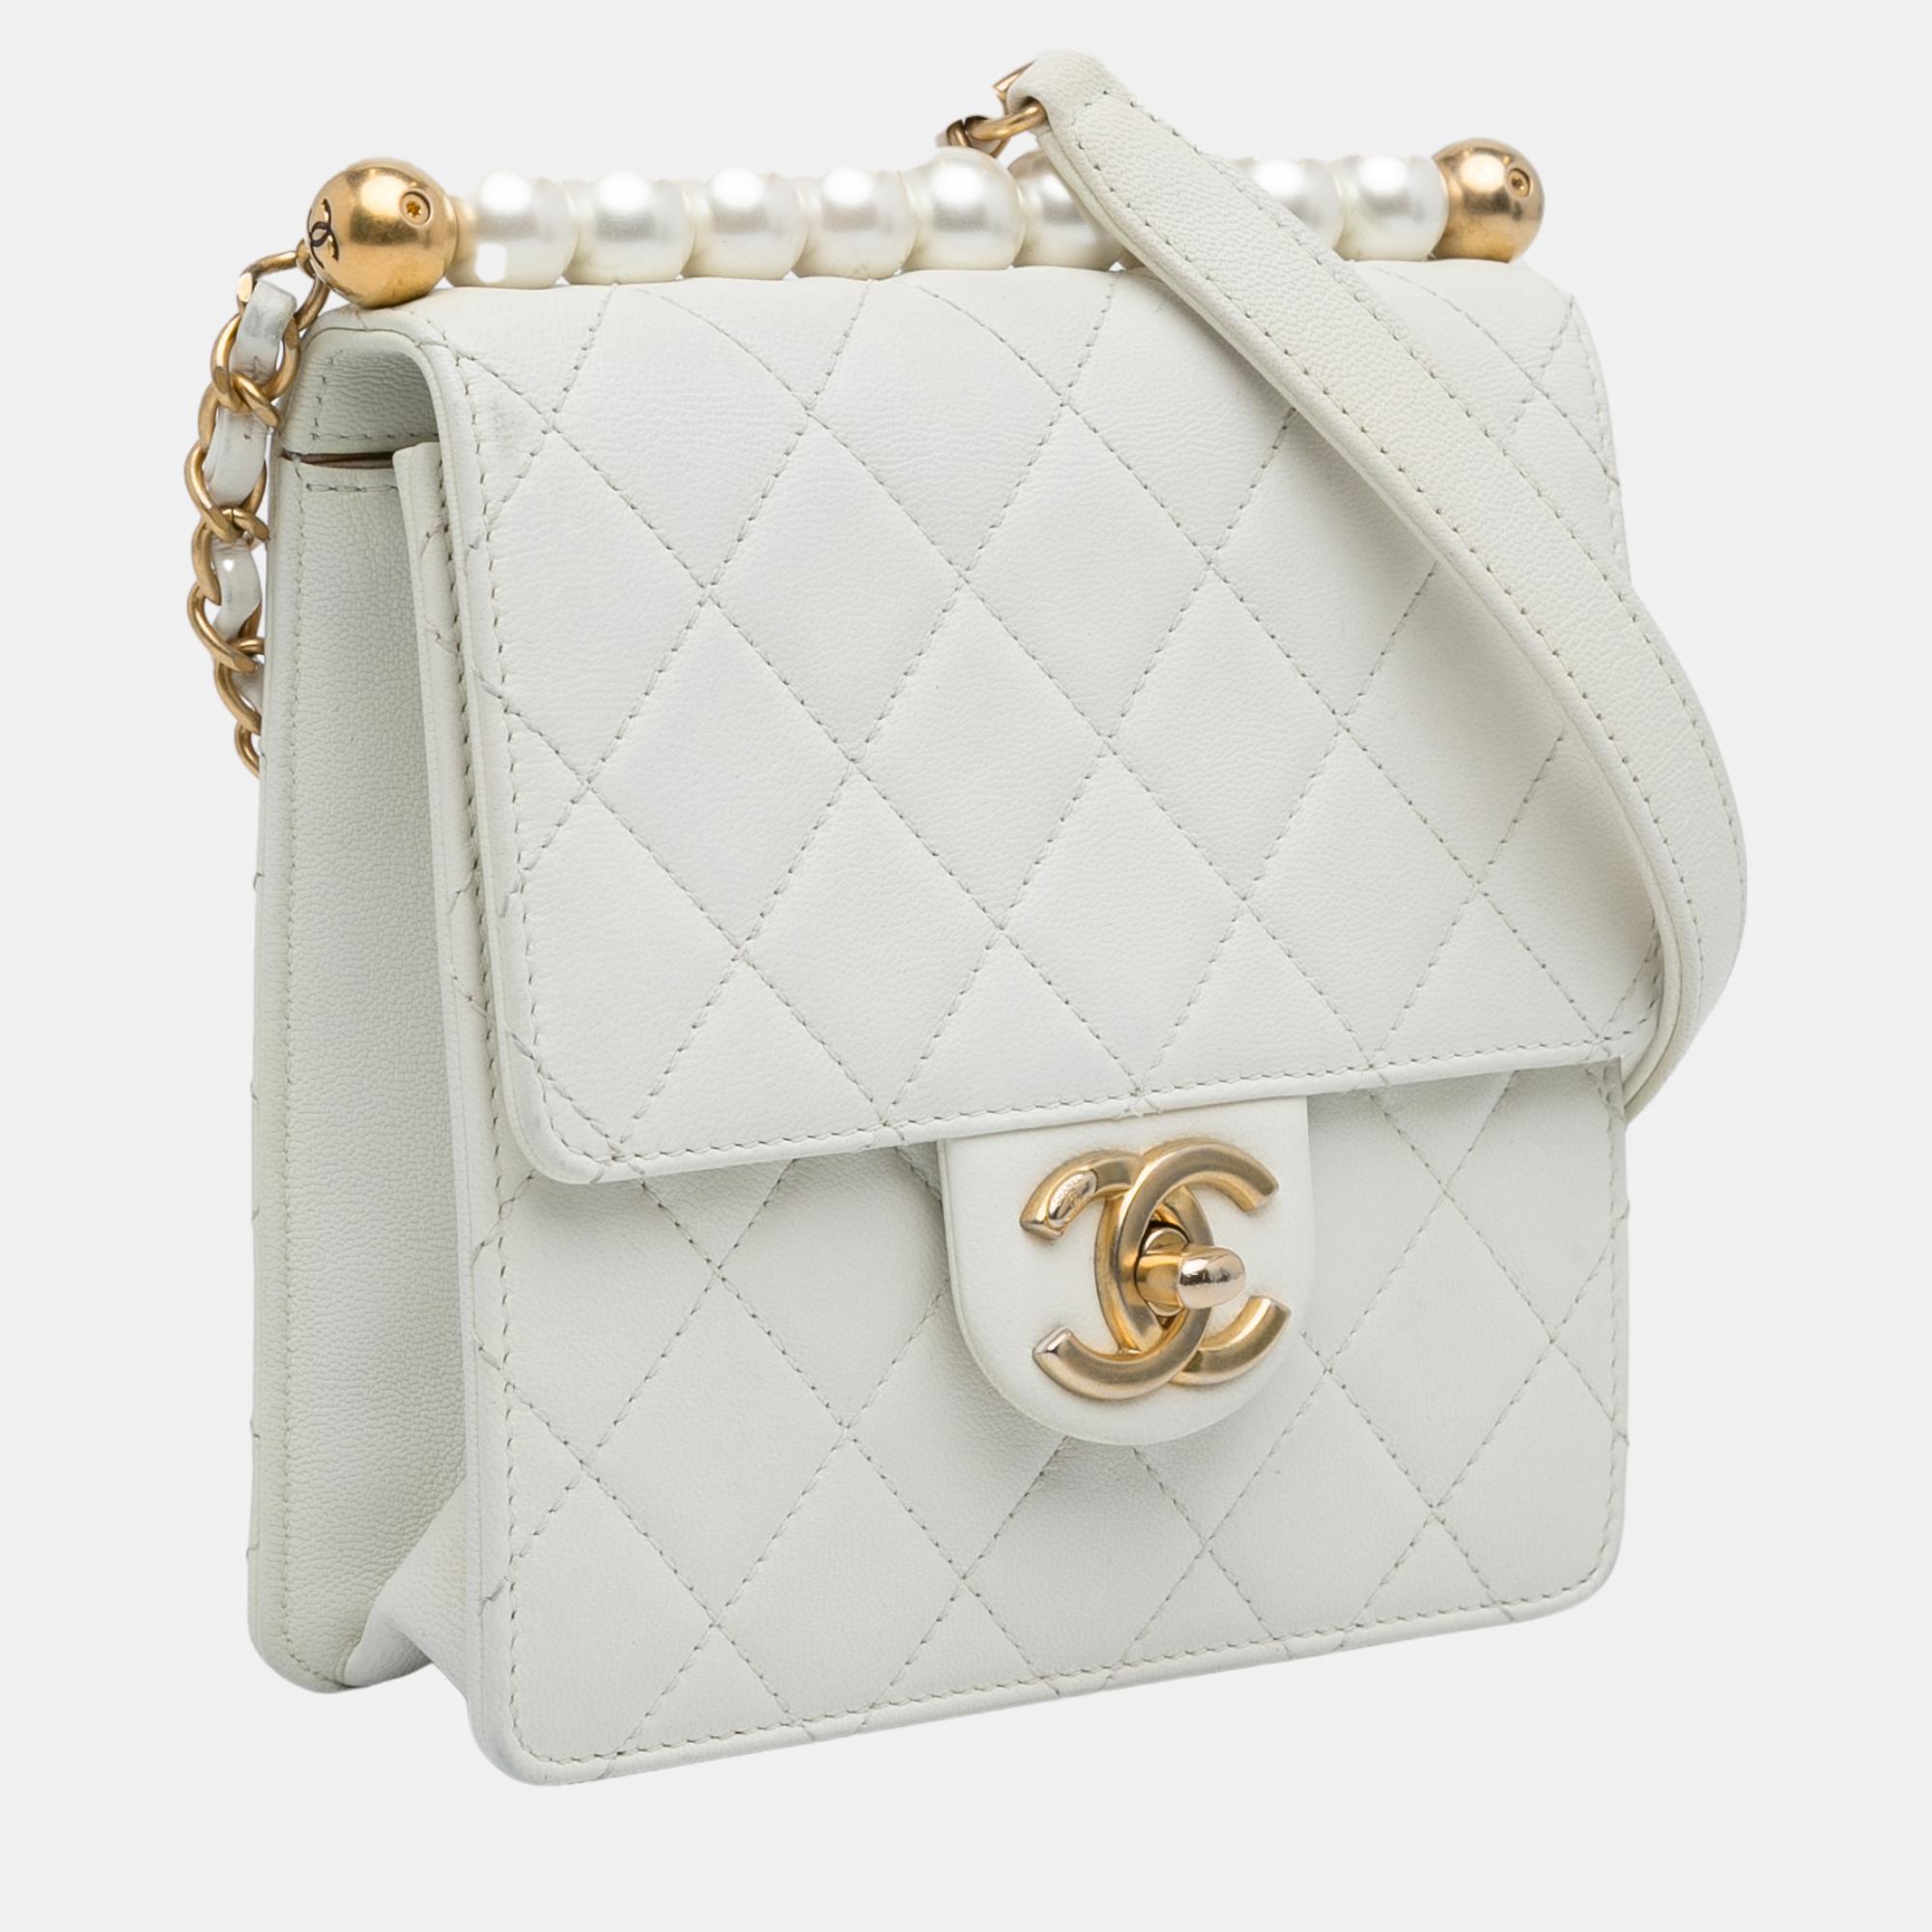 

Chanel White Small Chic Pearls Flap Bag